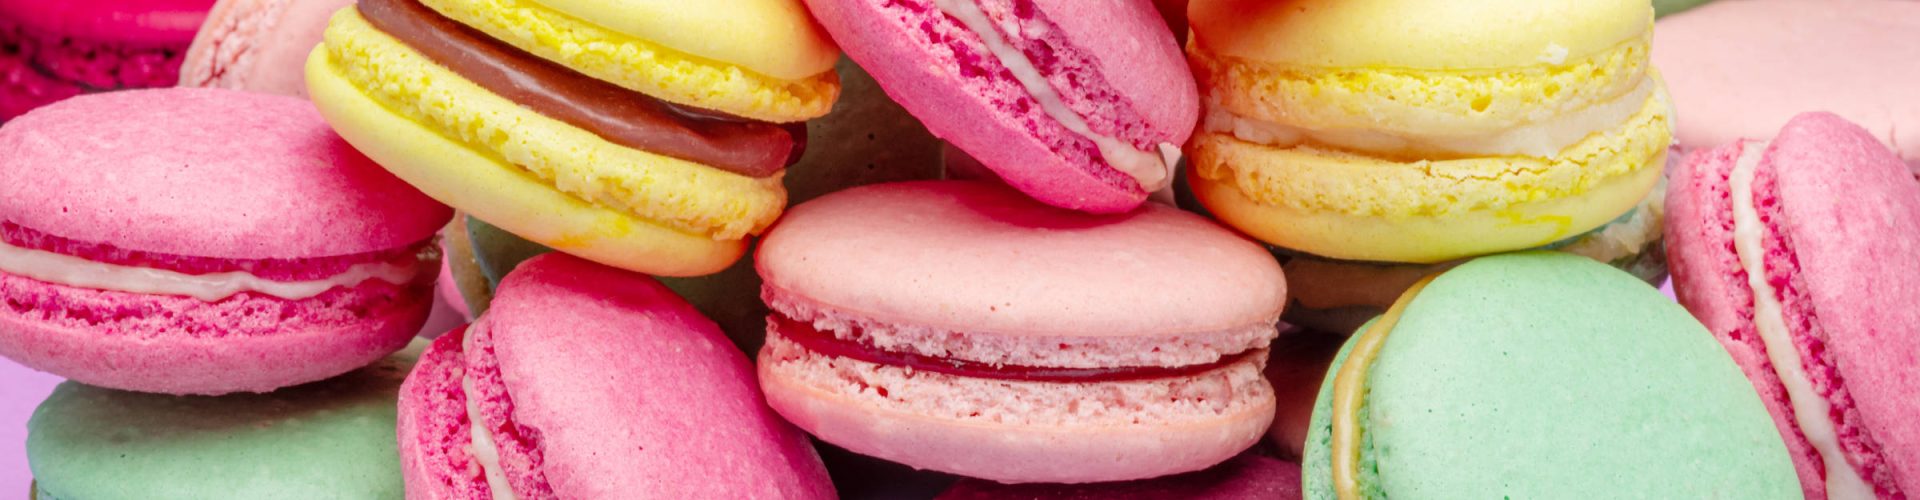 Colourful selection of macaroons